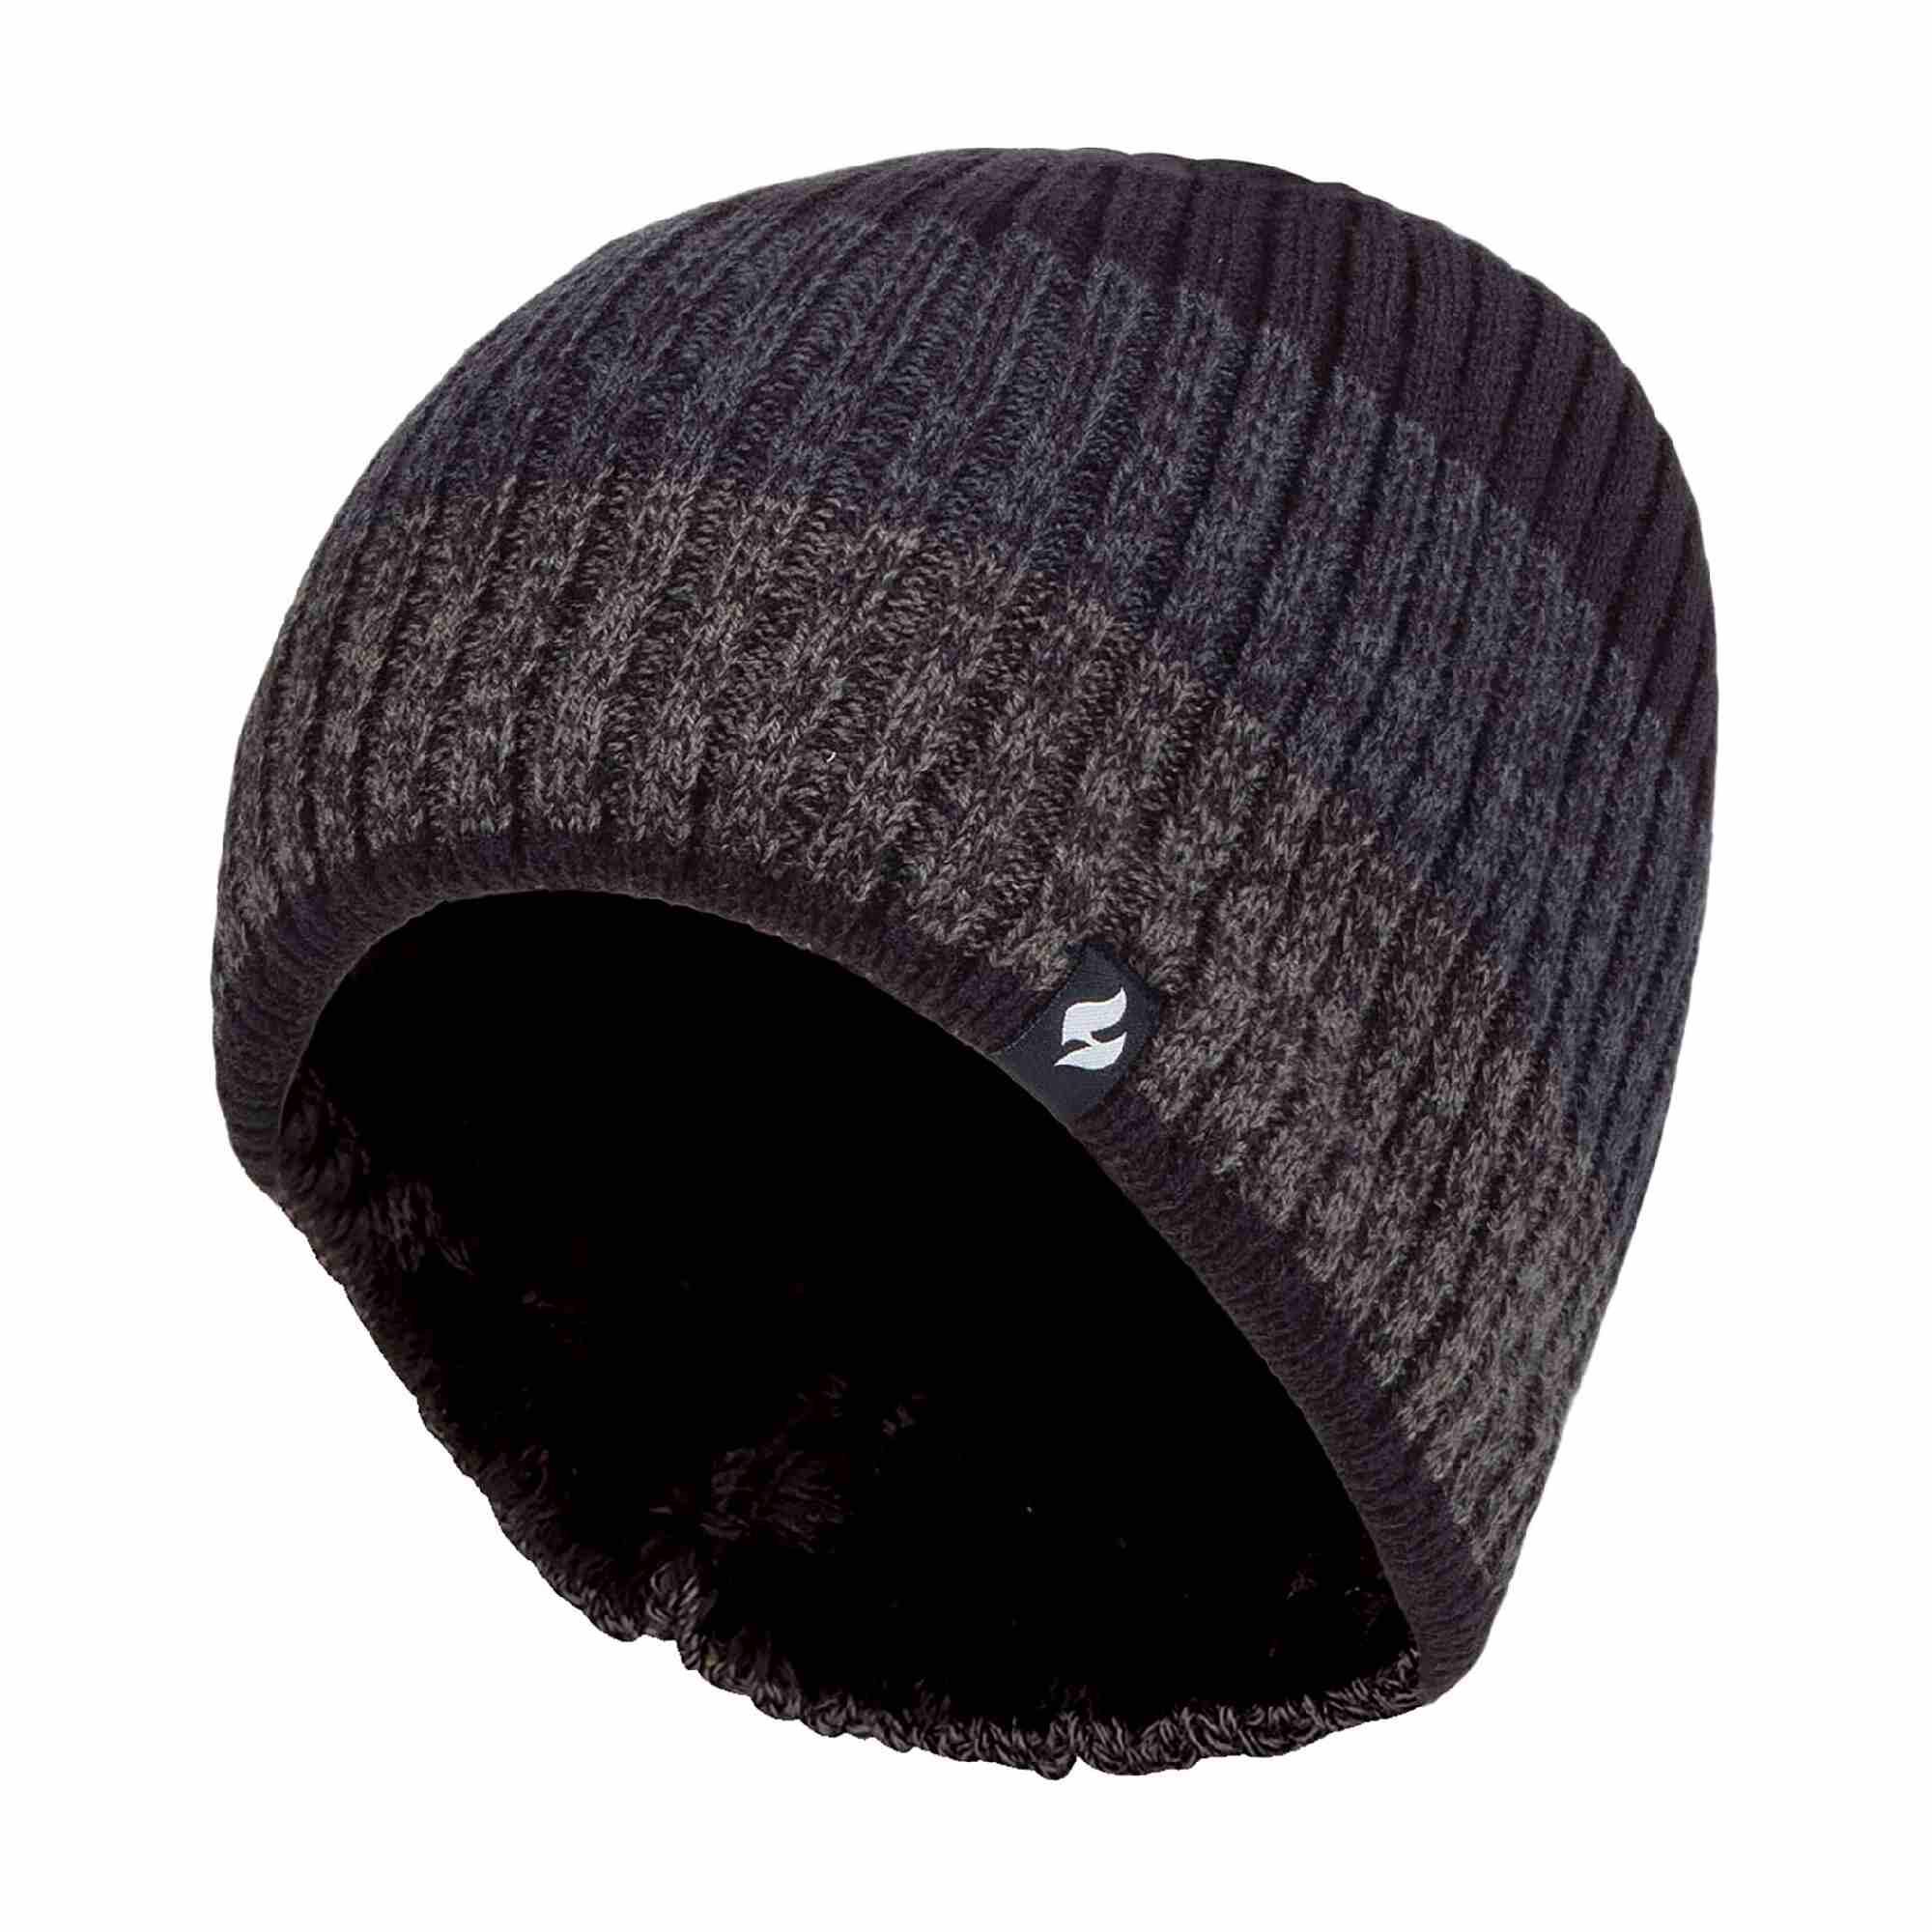 Mens Fleece Lined Striped Winter High Performance Soft Insulated Thermal Beanie 1/4